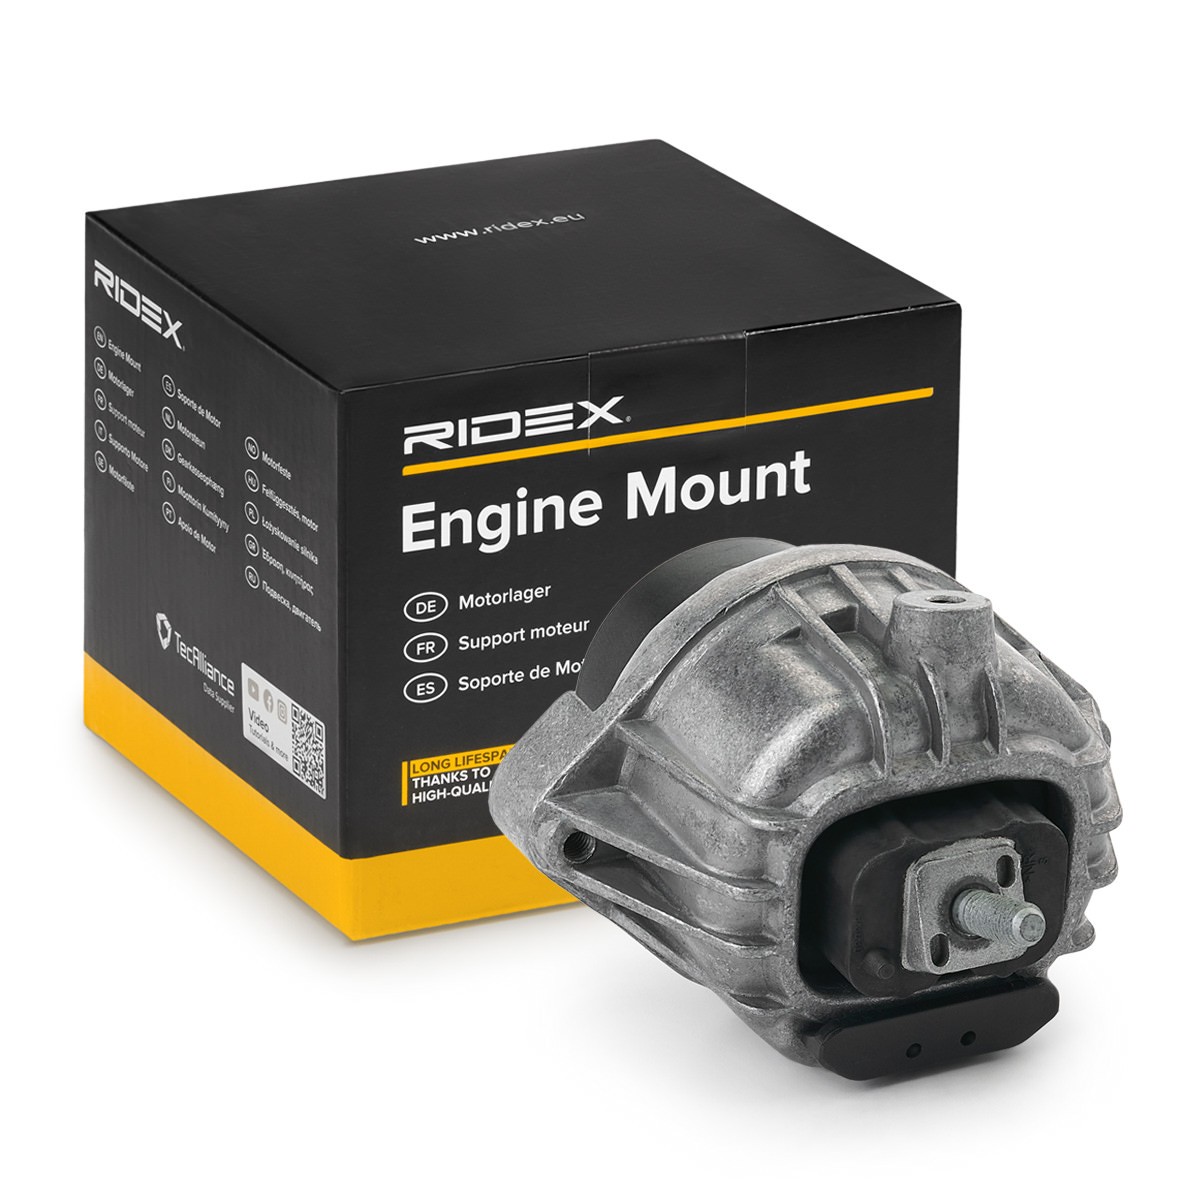 Great value for money - RIDEX Engine mount 247E0443